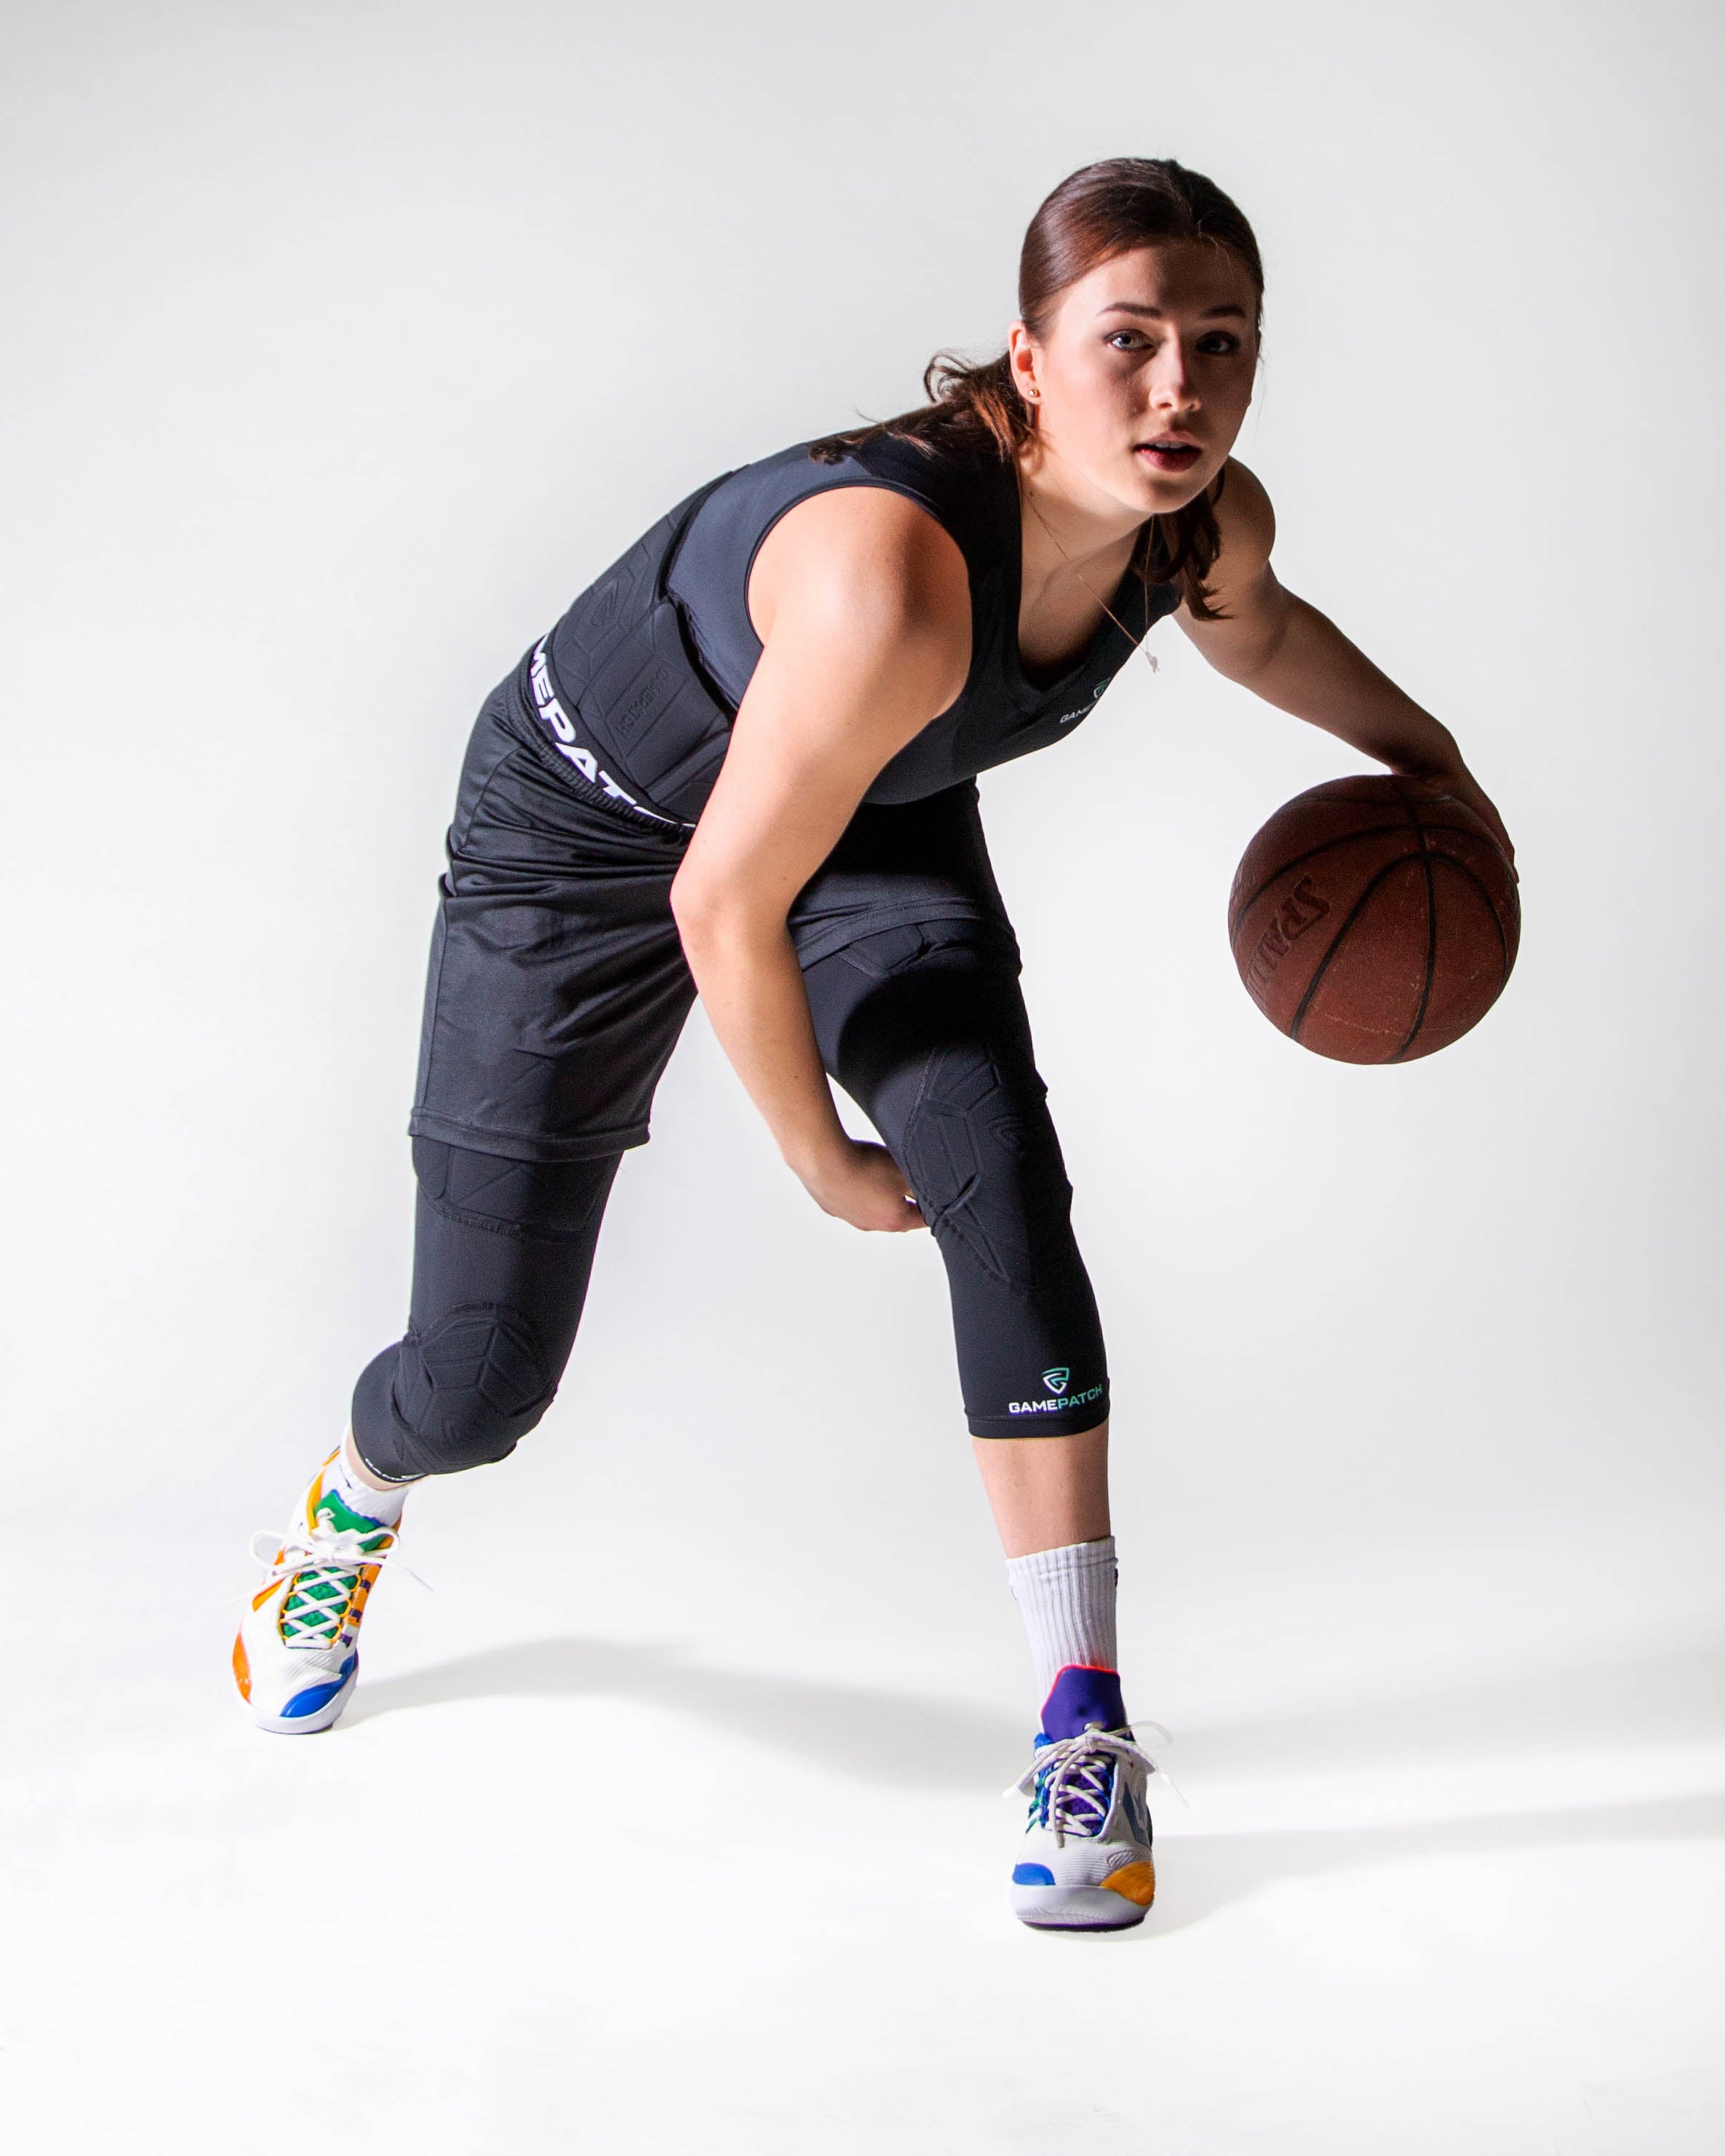 Role of Compression Clothing jerseys in Basketball & Volleyball